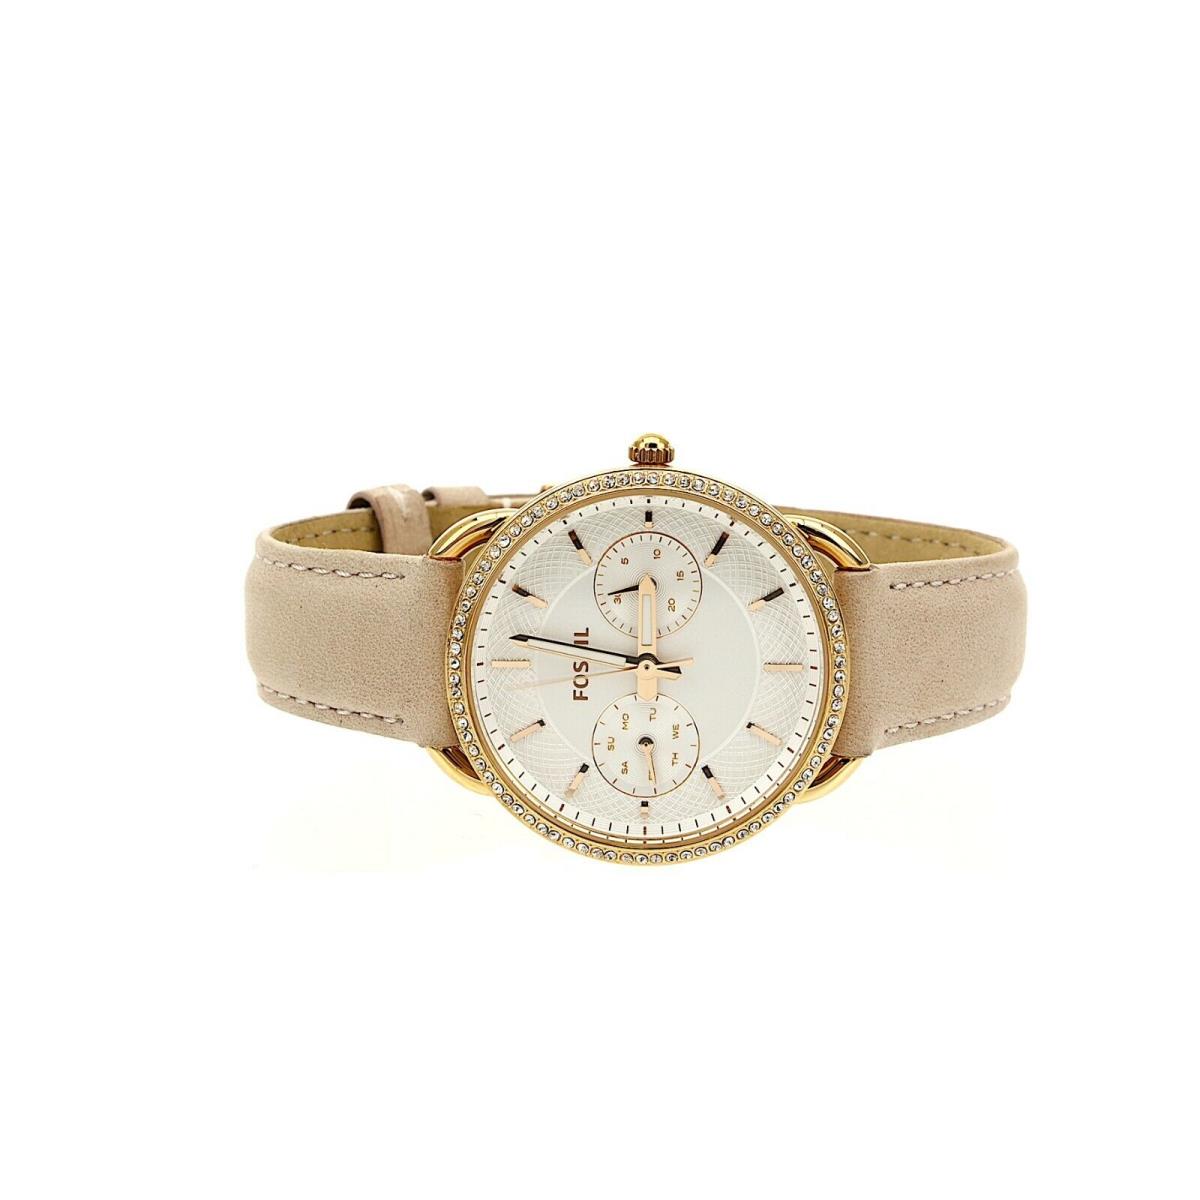 Fossil Women`s Rose Gold Light Pink Jacqueline Leather Strap Watch 1013 - Mother Of Pearl Dial, Light Pink Band